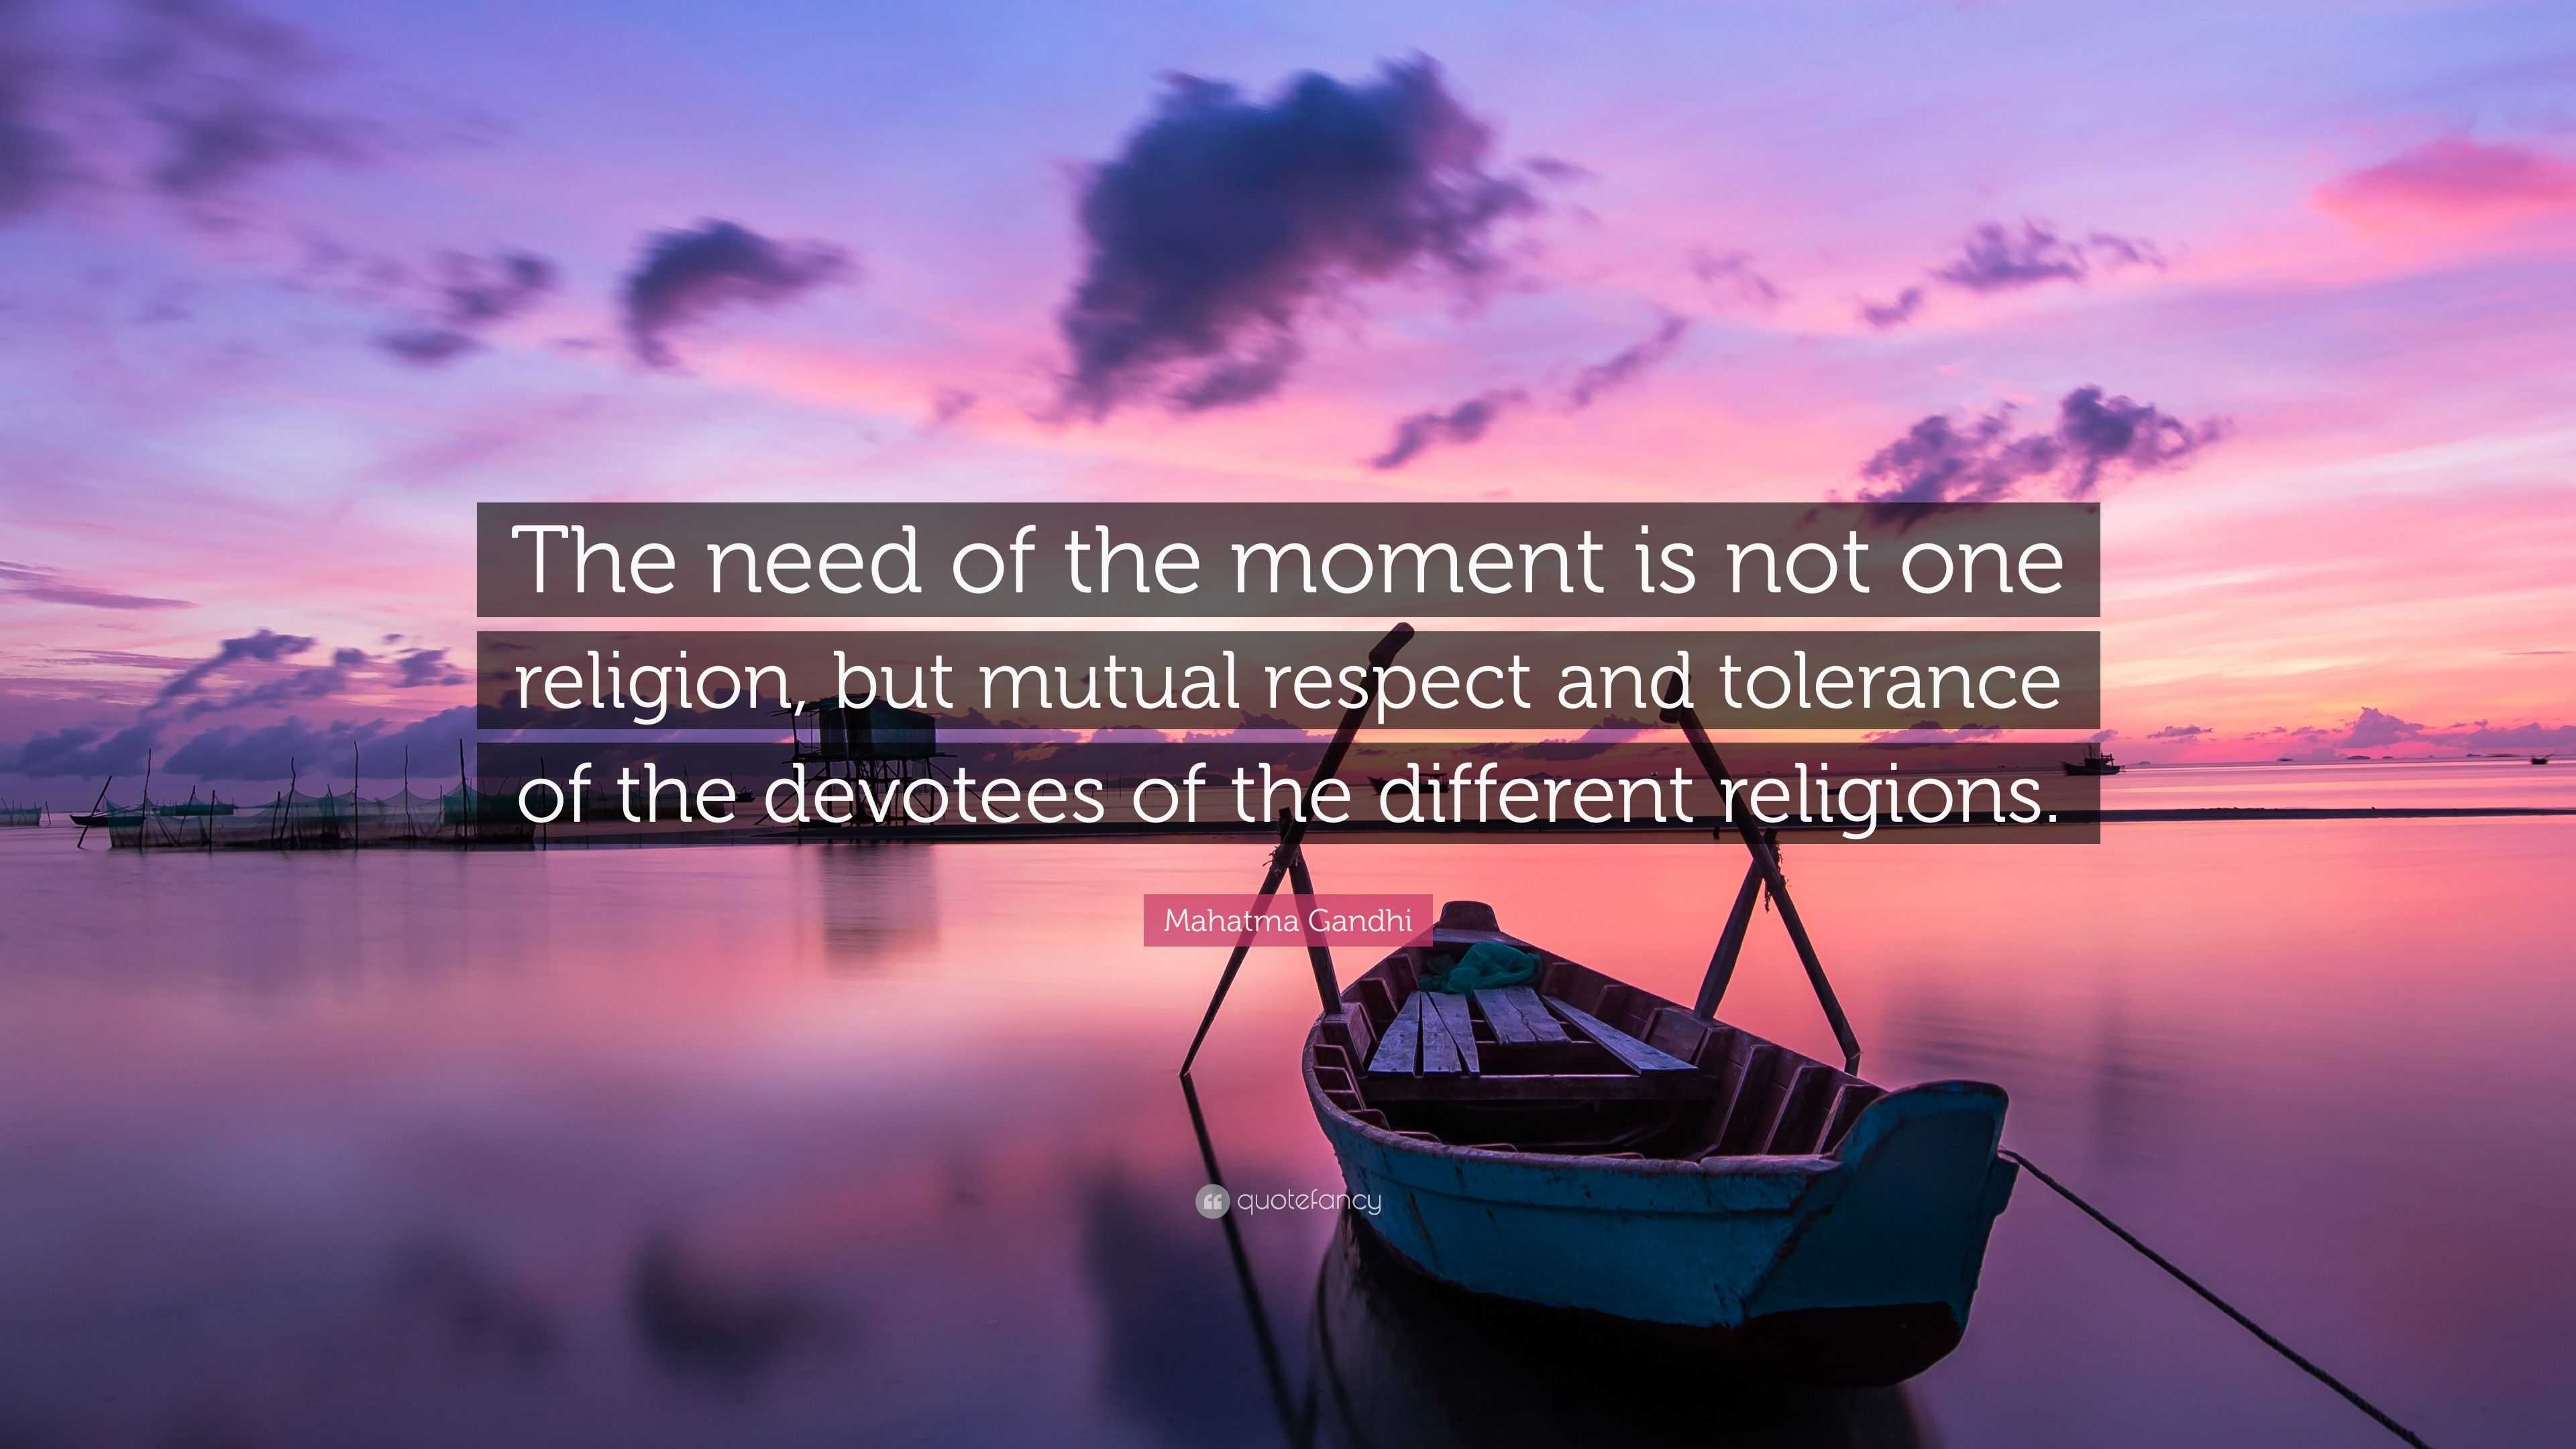 Mahatma Gandhi Quote The Need Of The Moment Is Not One Religion But Mutual Respect And Tolerance Of The Devotees Of The Different Religions 7 Wallpapers Quotefancy